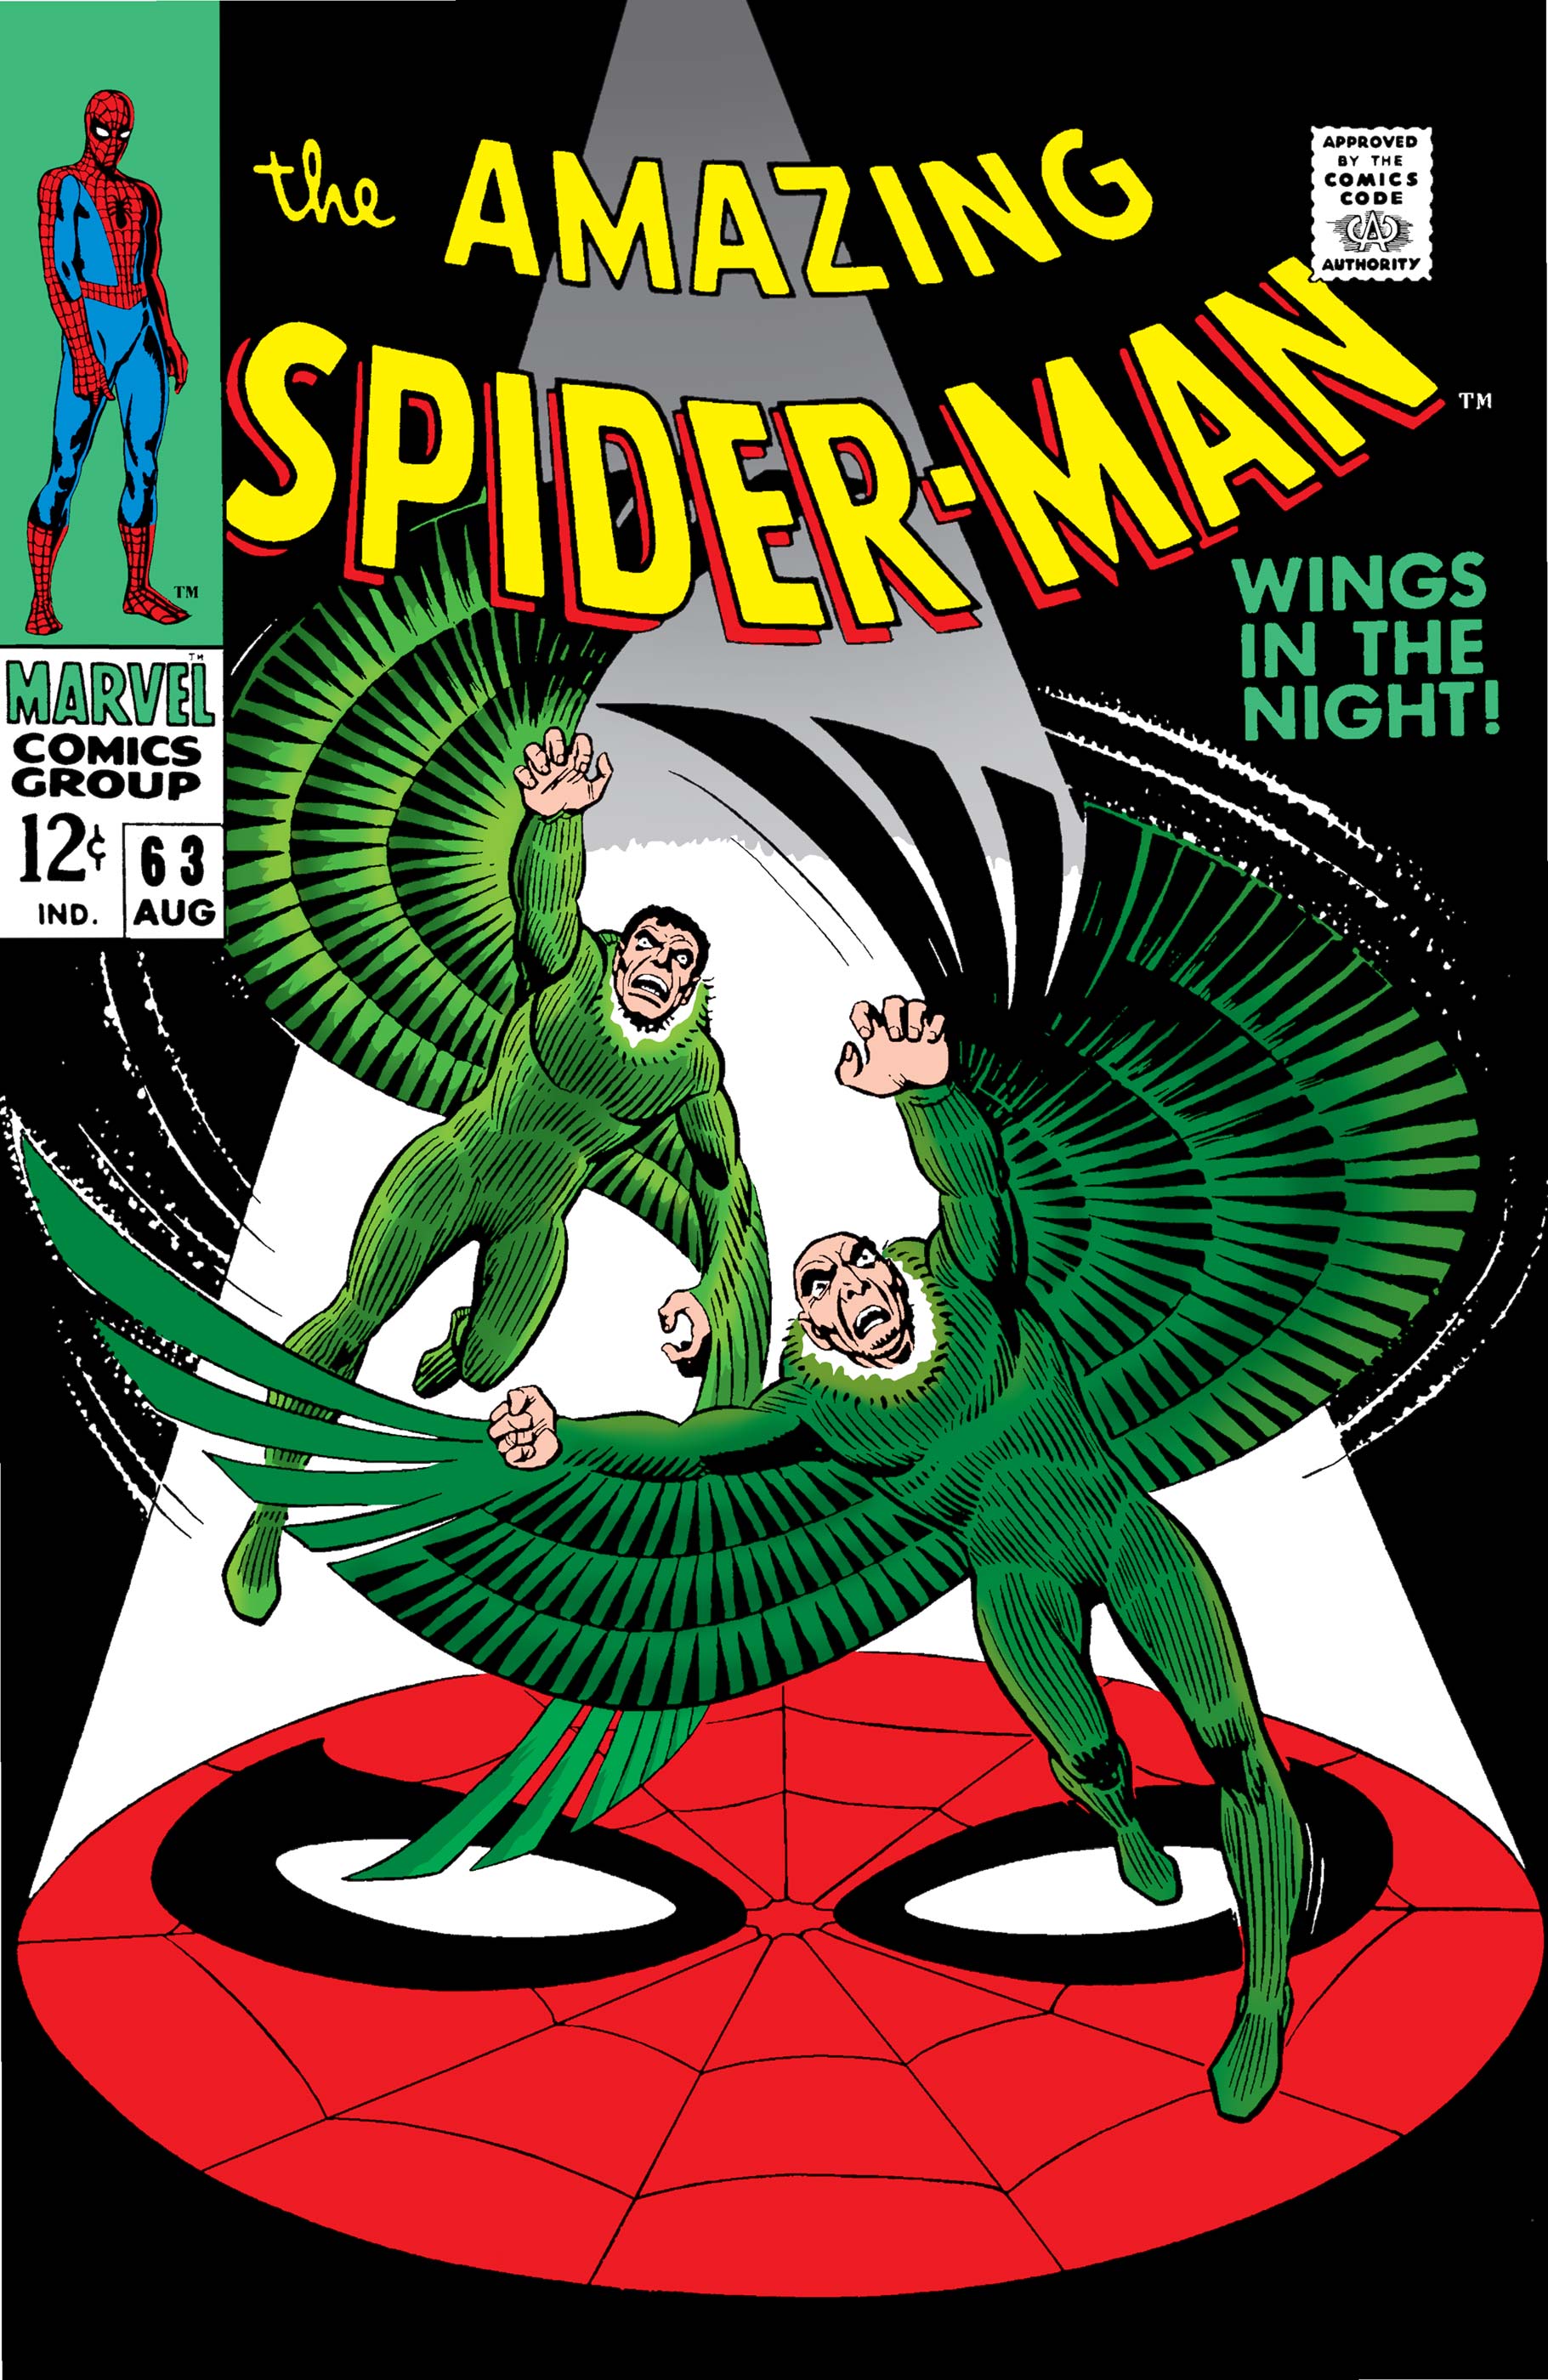 The Amazing Spider-Man (1963) #63 | Comic Issues | Marvel